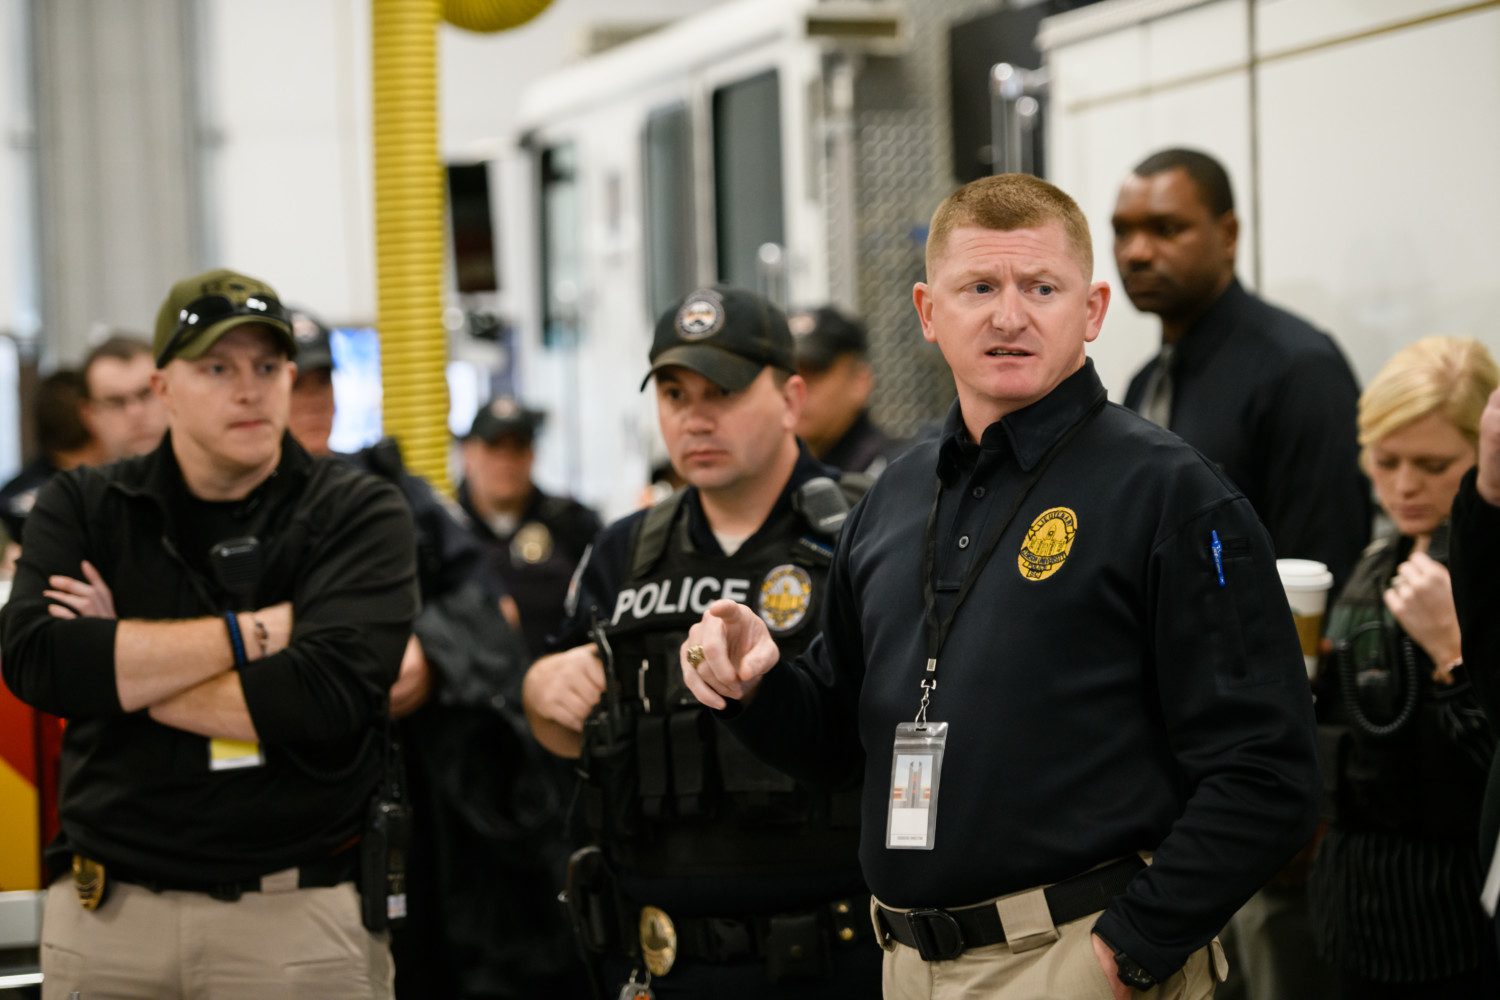 Lt. Chris Harrington of Clemson University Police Department was an exercise director for the active shooter drill on campus on March 19, 2019.